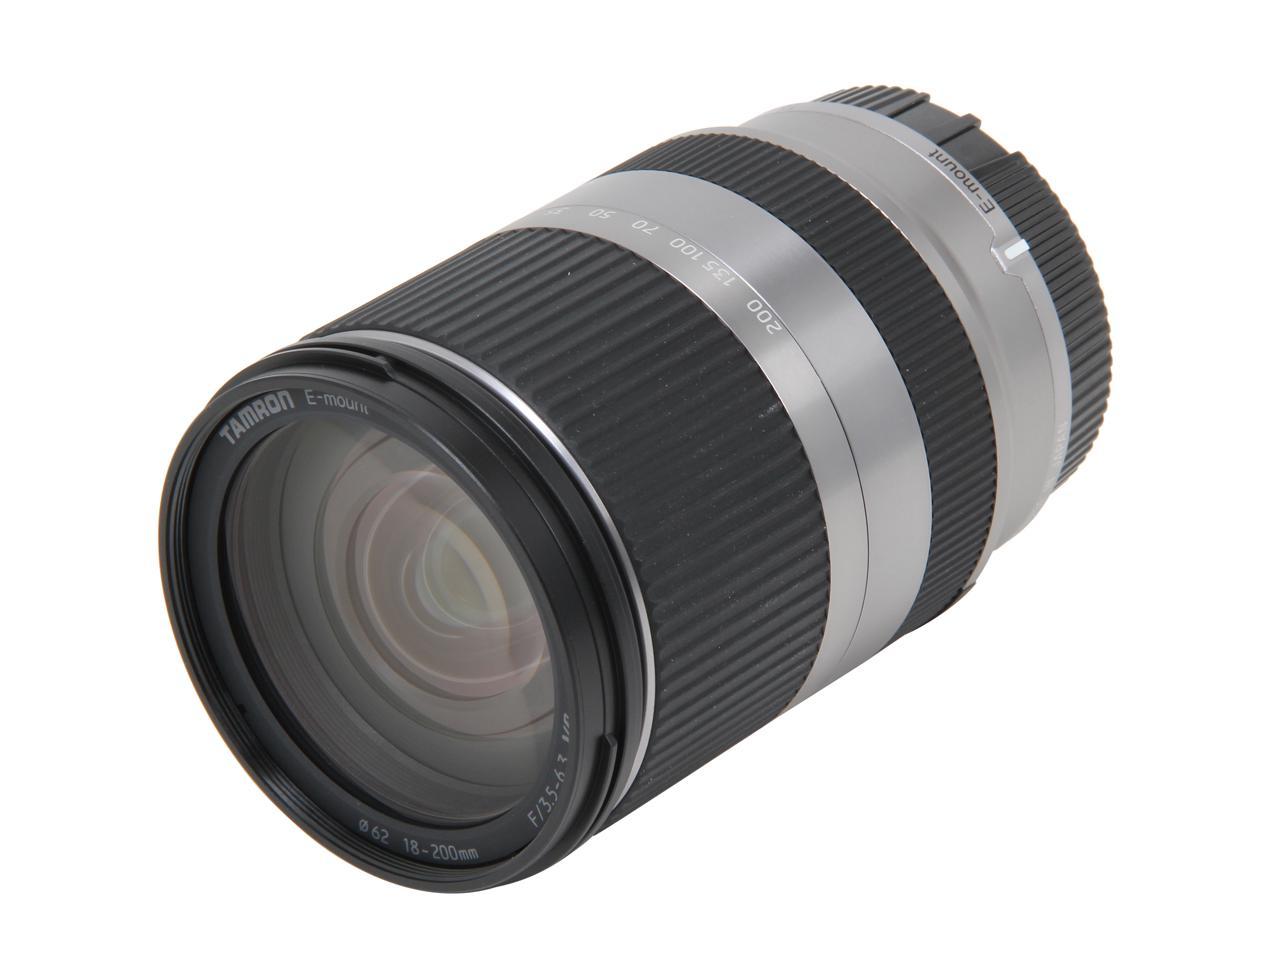 TAMRON AFB011S-700 18-200mm F/3.5-6.3 Di III VC Lens For SONY E-mount Silver